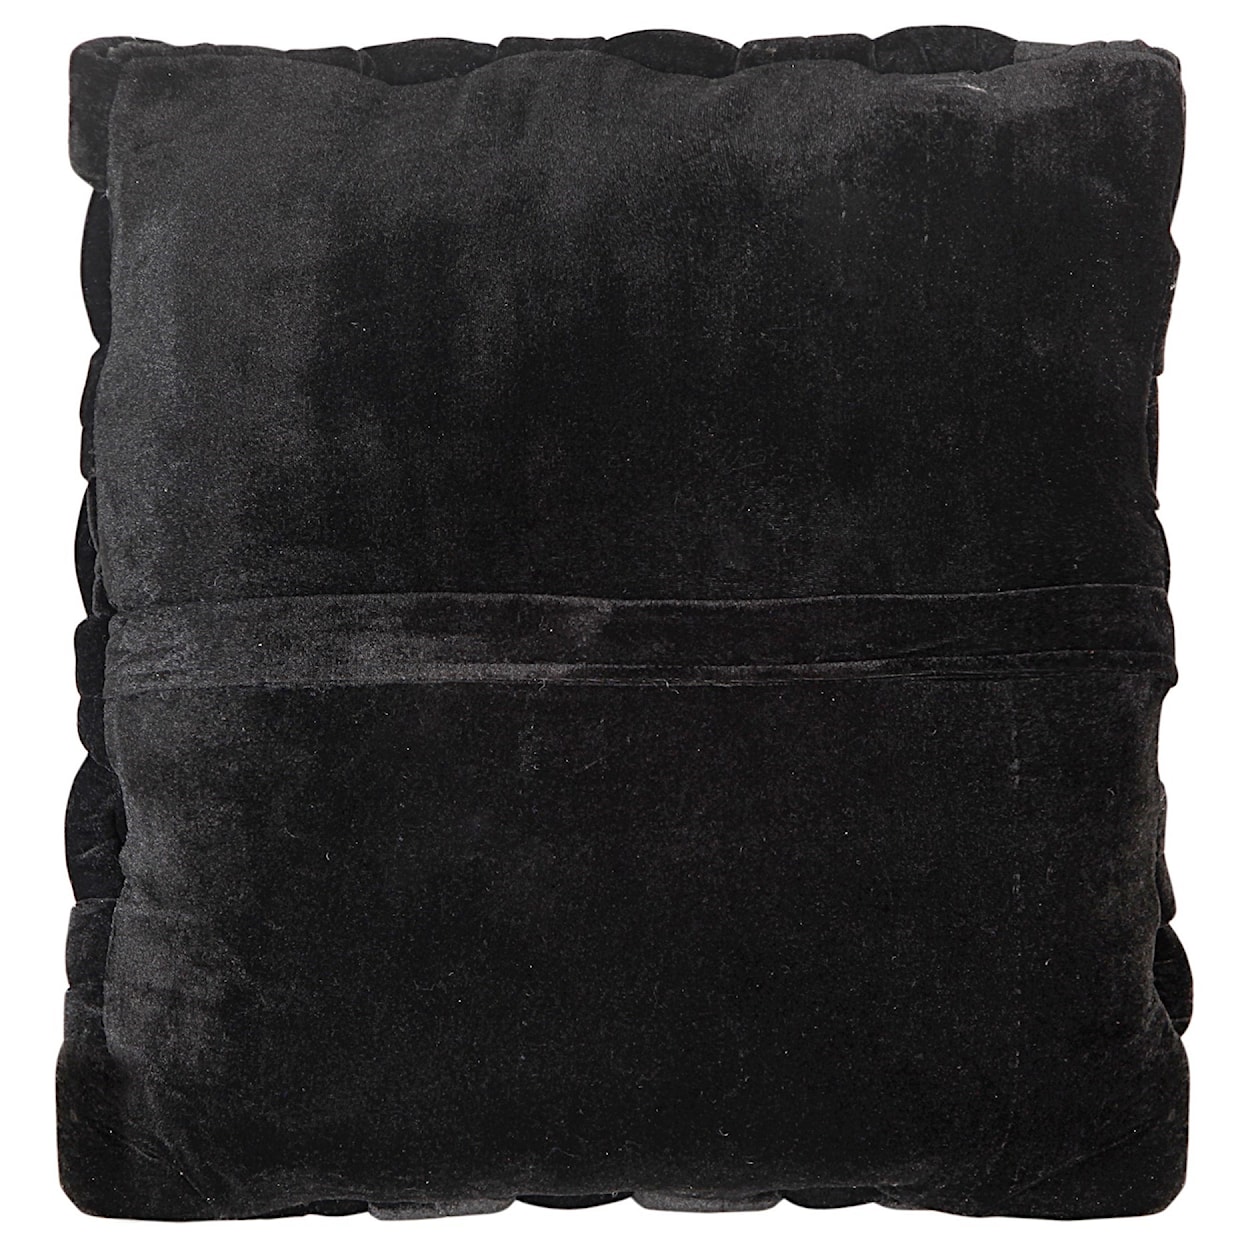 Moe's Home Collection Pillows and Throws Pj Velvet Pillow Black